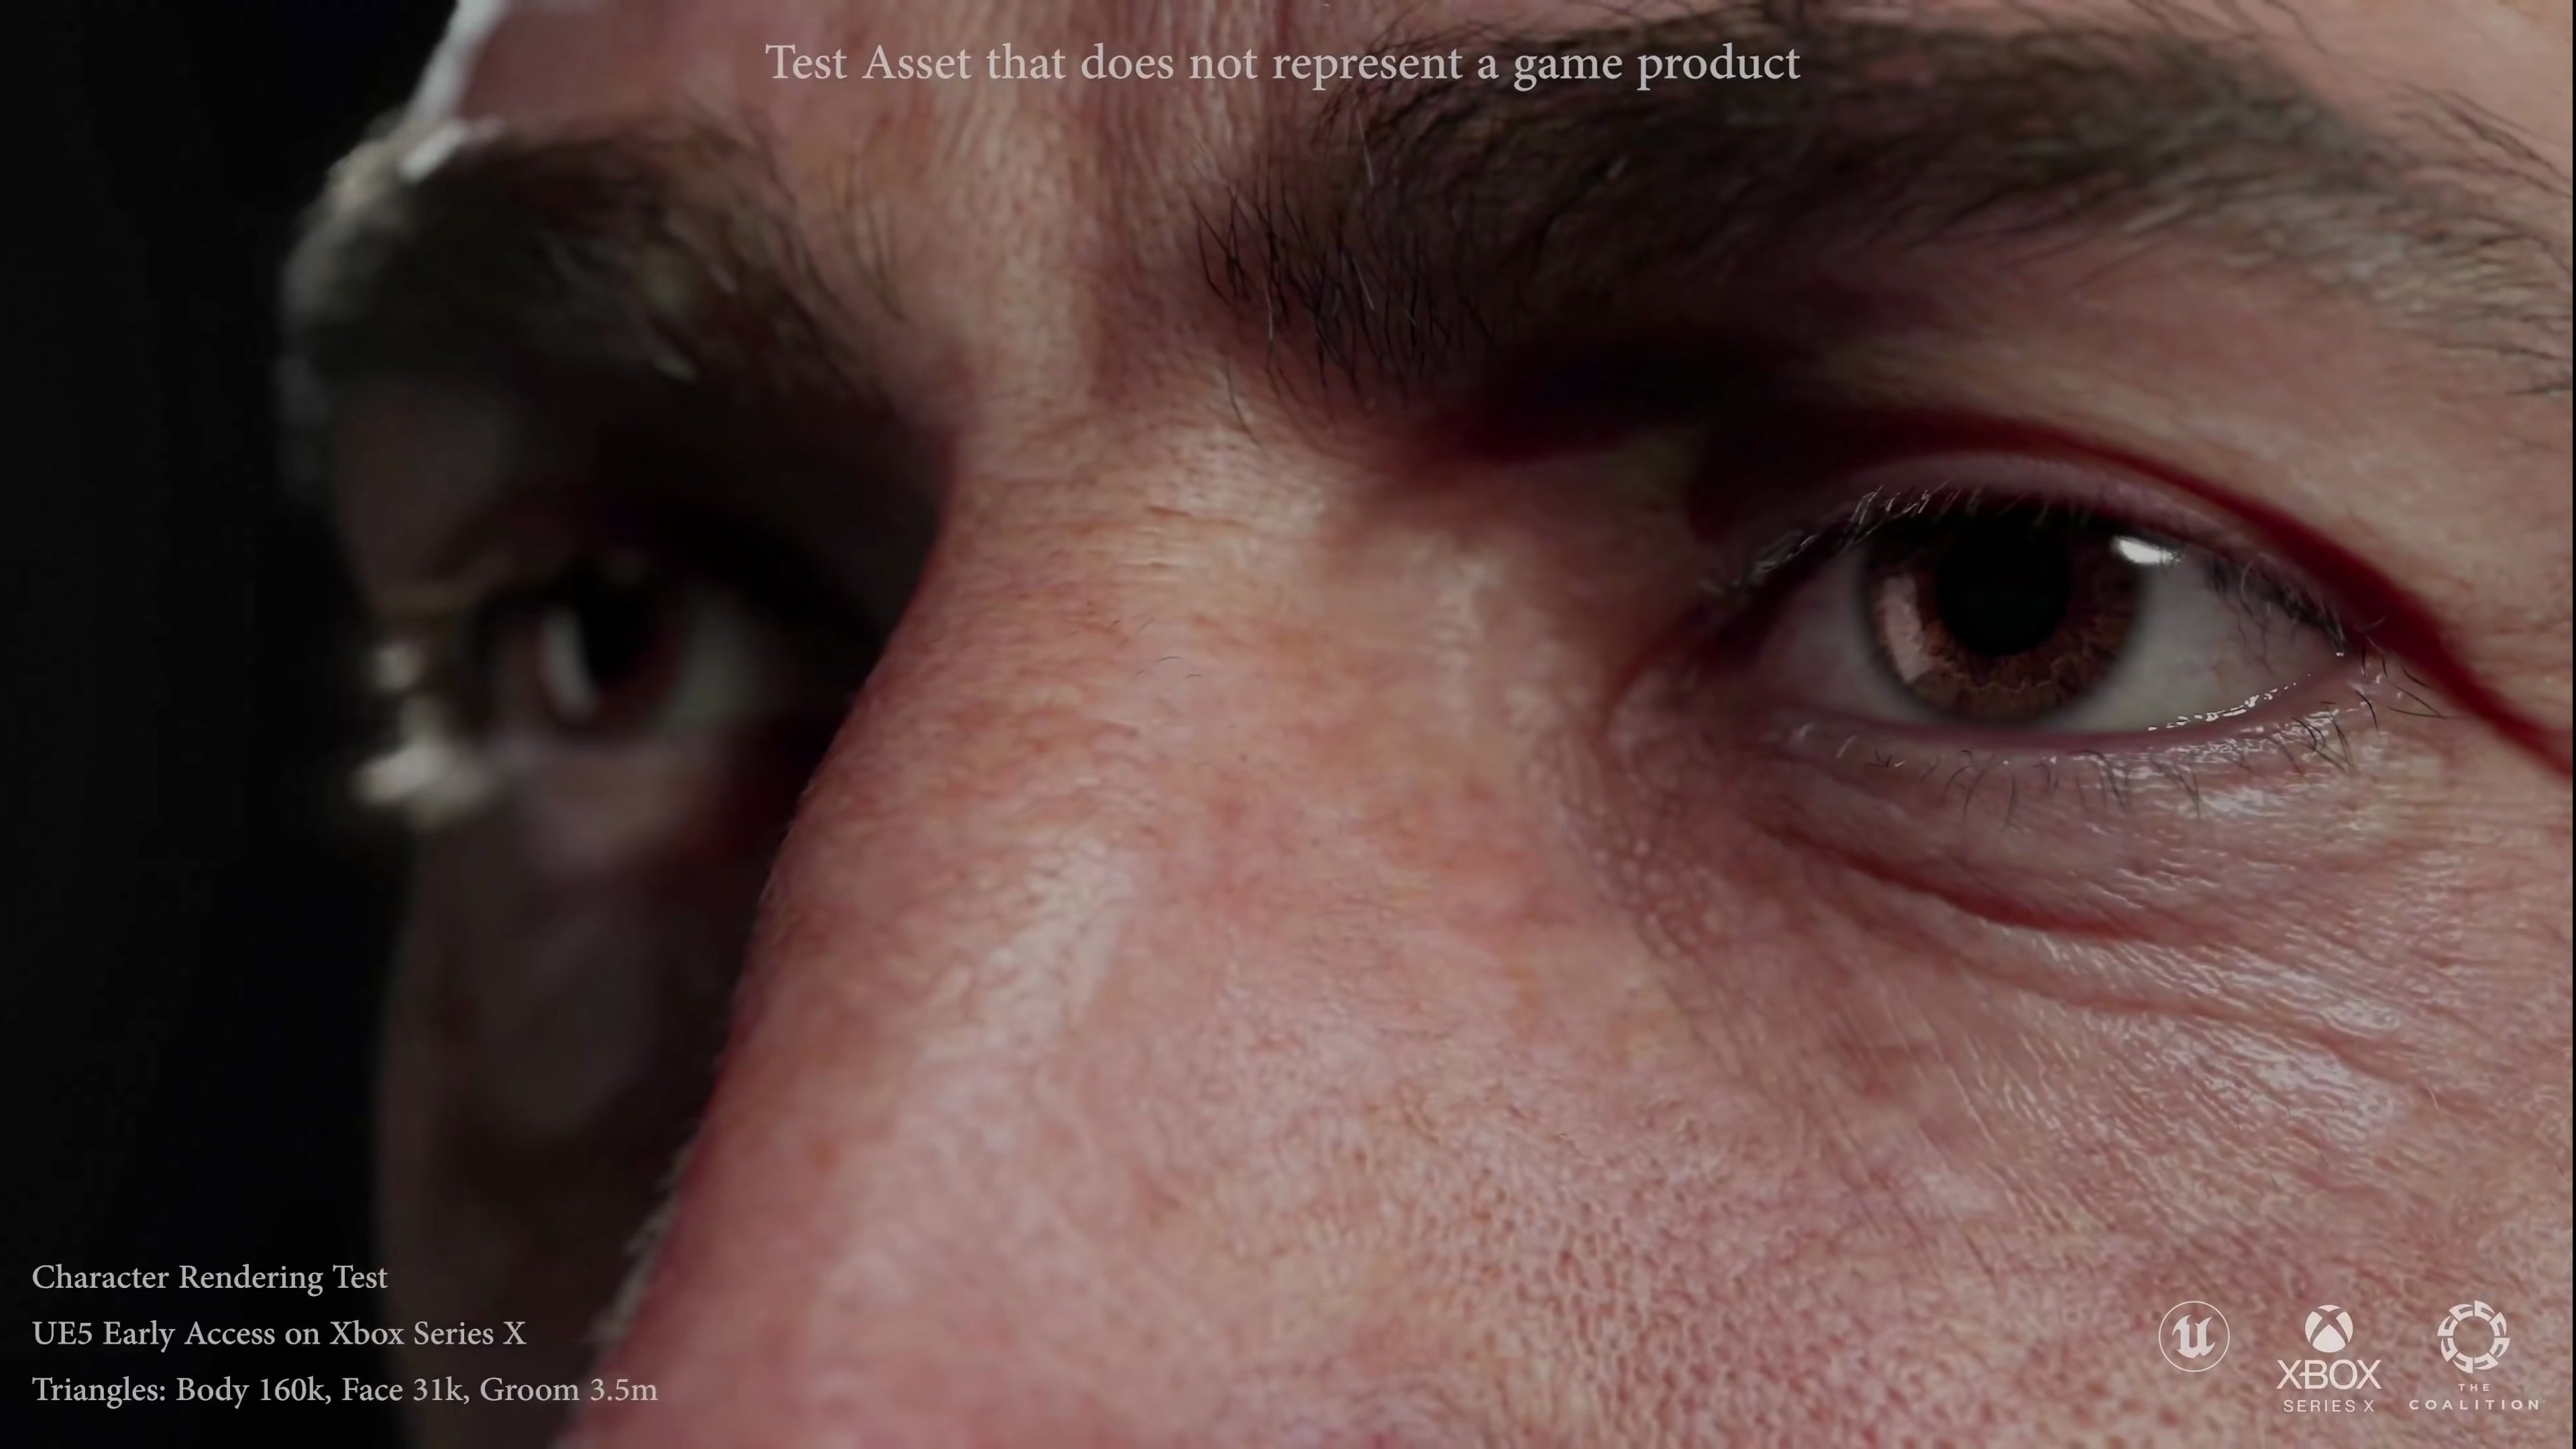 A close-up on a man's eyes in The Coalition's Unreal Engine 5 tech demo video.